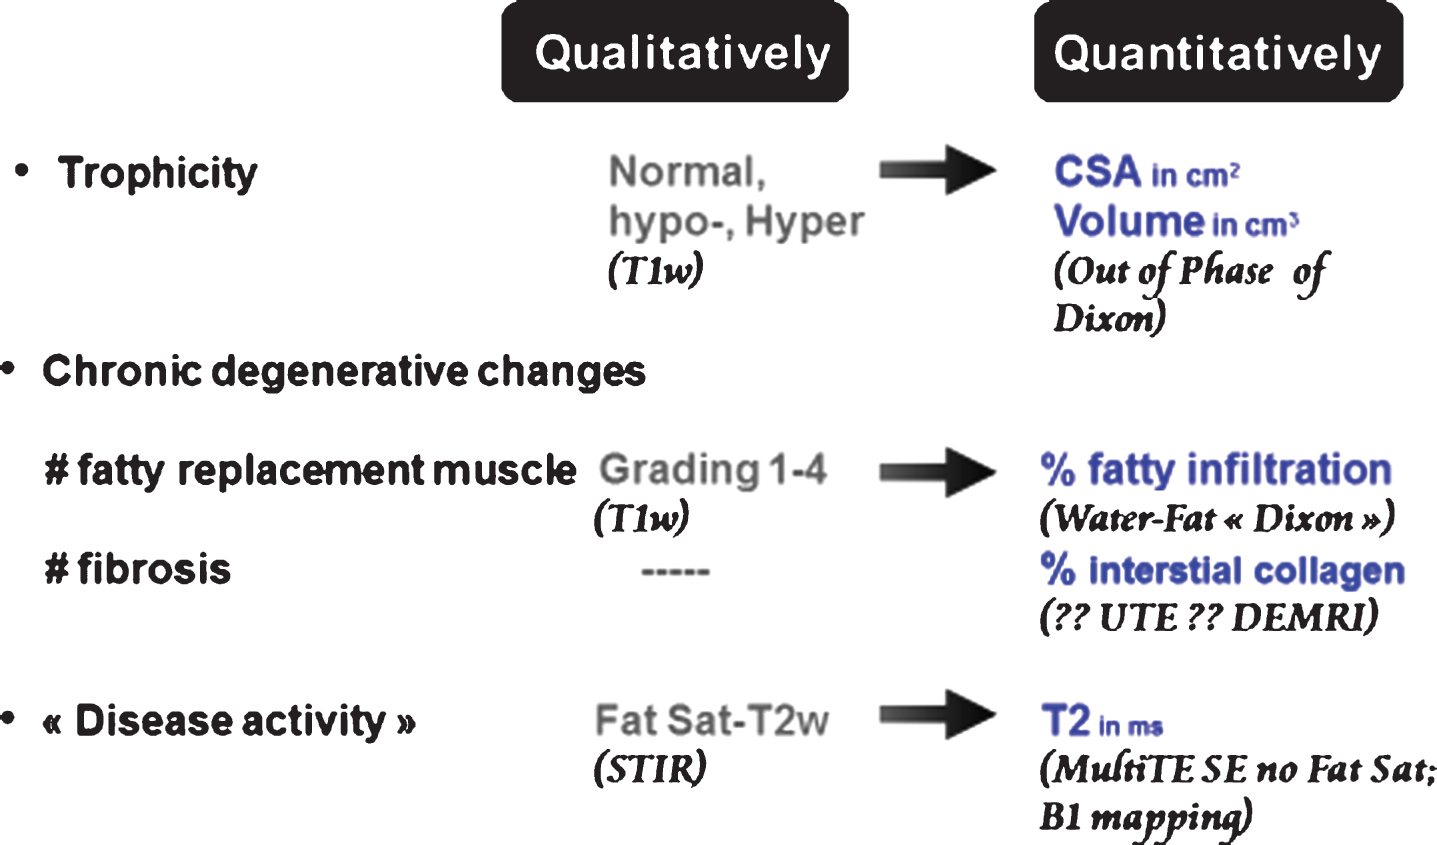 Skeletal muscle tissue characterization by NMR imaging. Comparison of qualitative and quantitative approaches. CSA: cross-sectional area; UTE: ultra-short echo time; DEMRI: delayed enhancement MRI; Fat Sat: fat saturation.